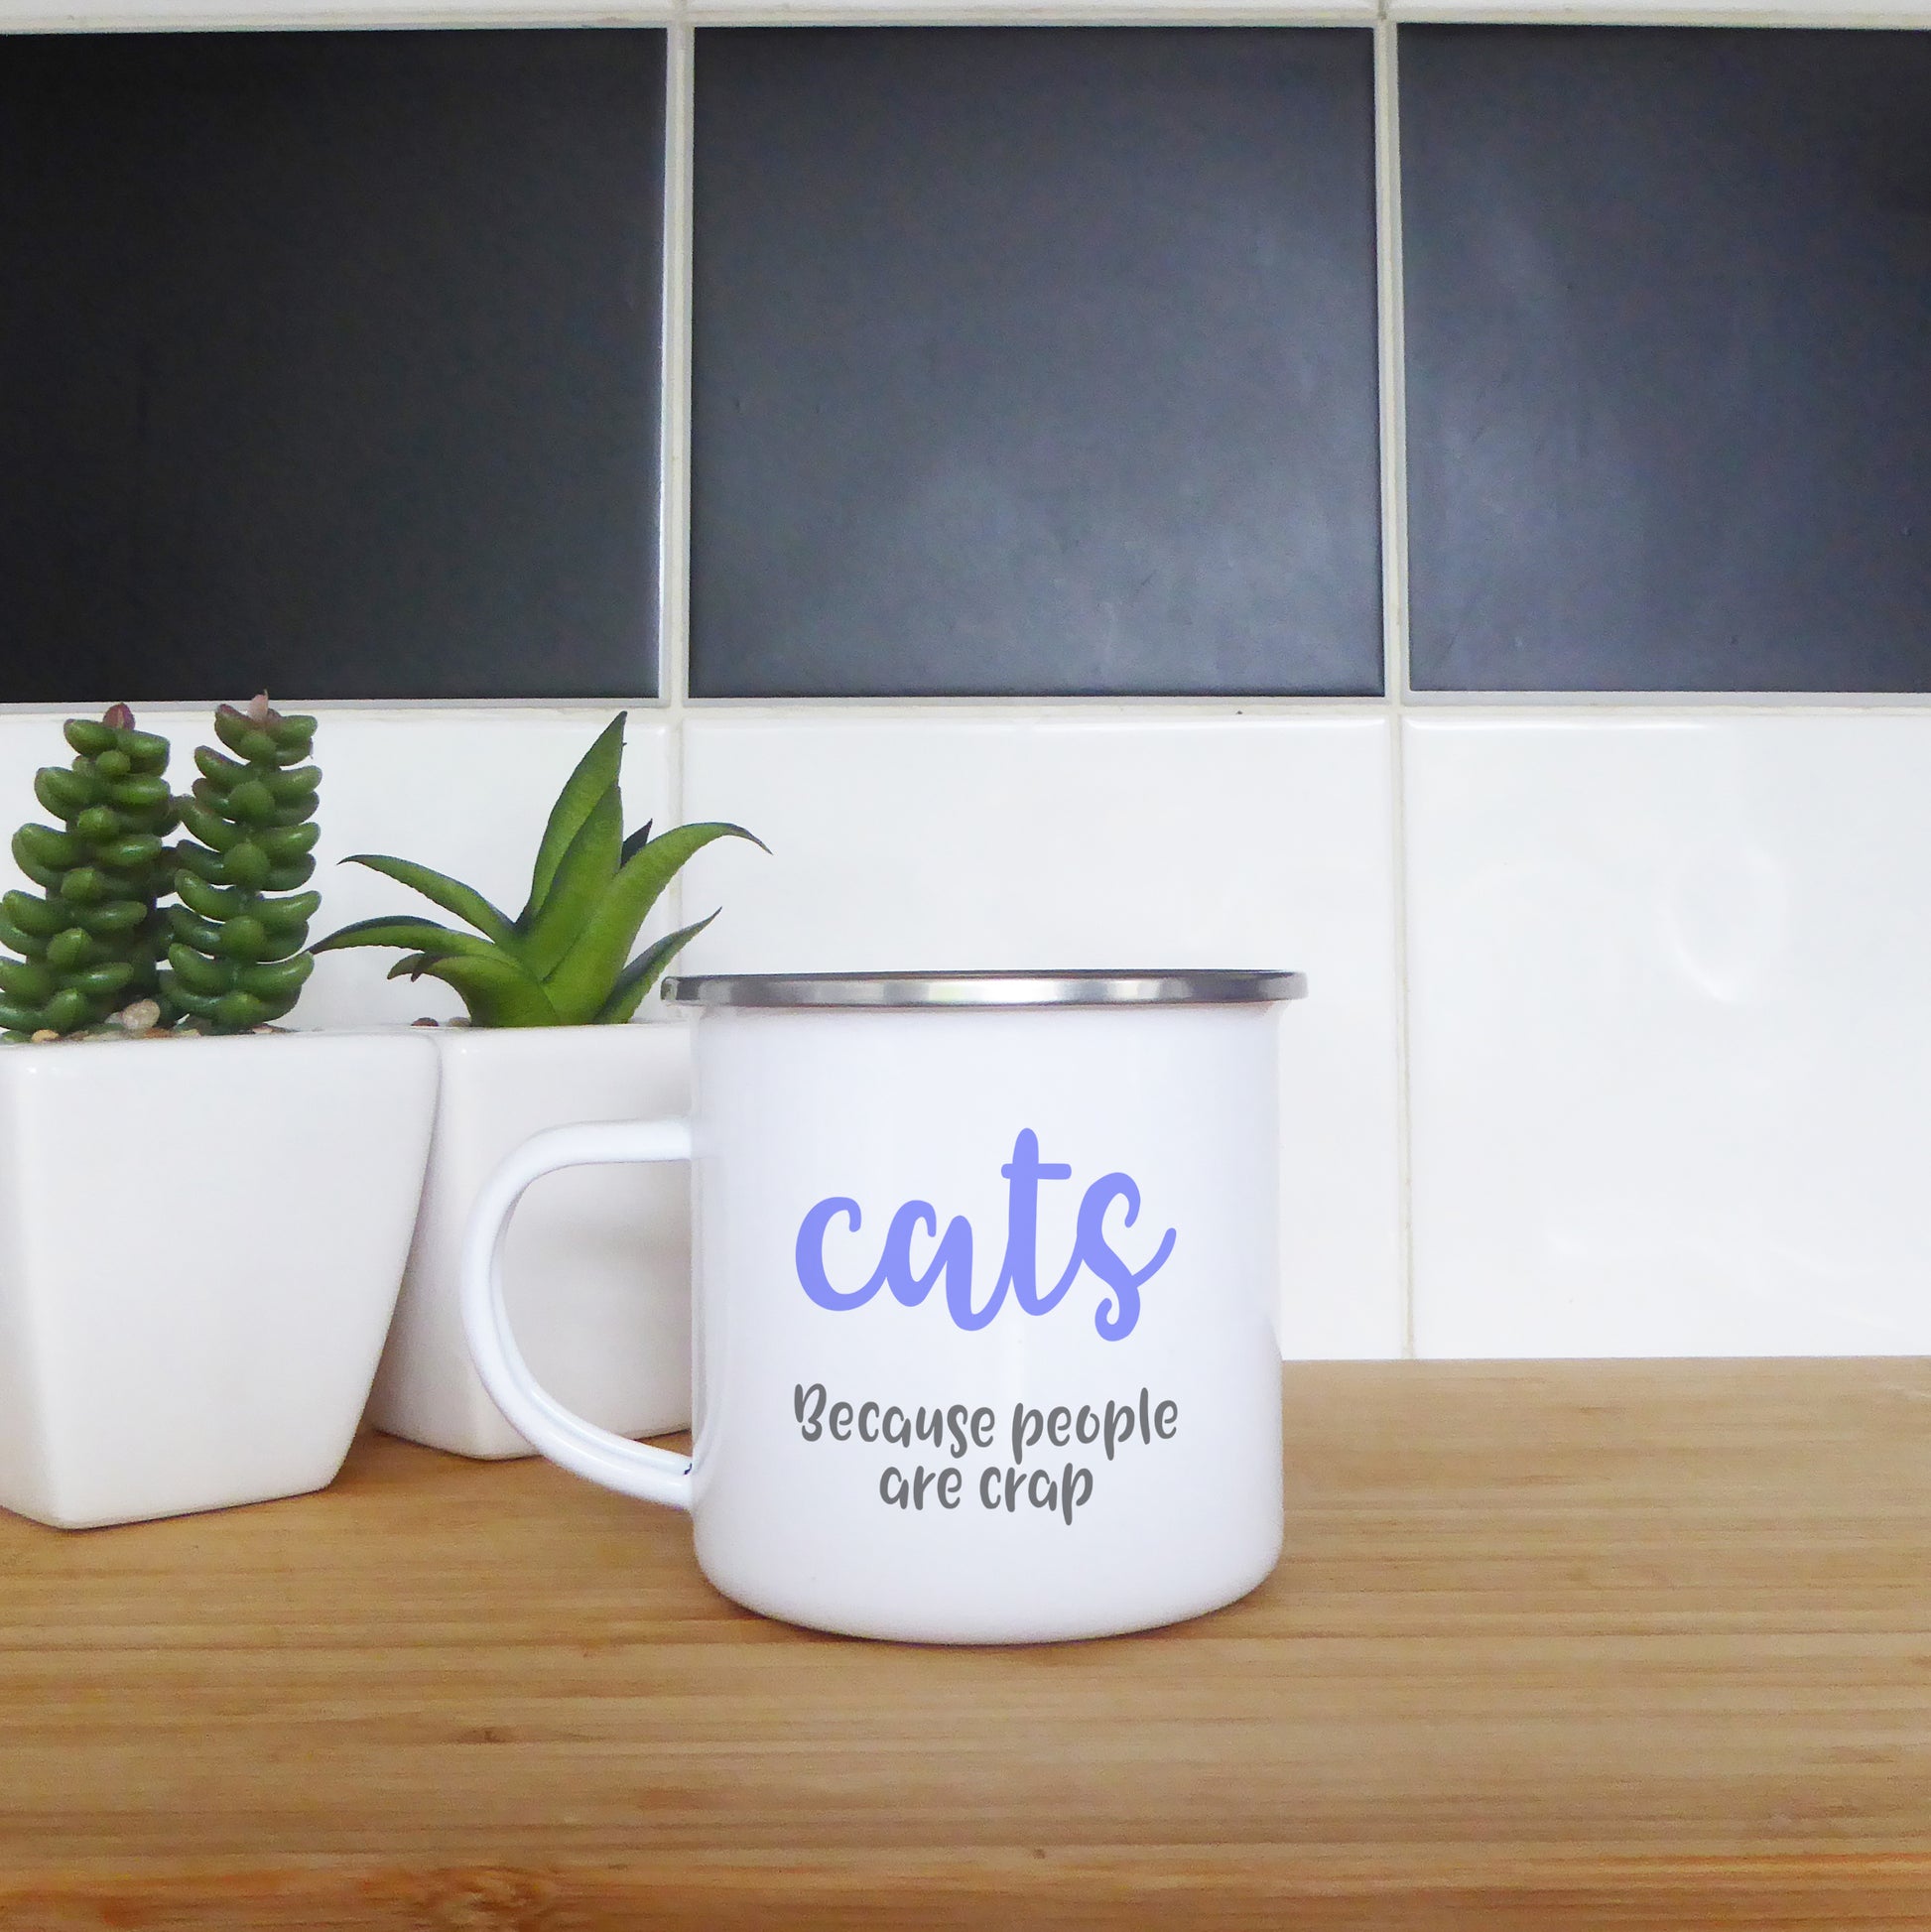 Cats because people are crap | Enamel mug - Adnil Creations